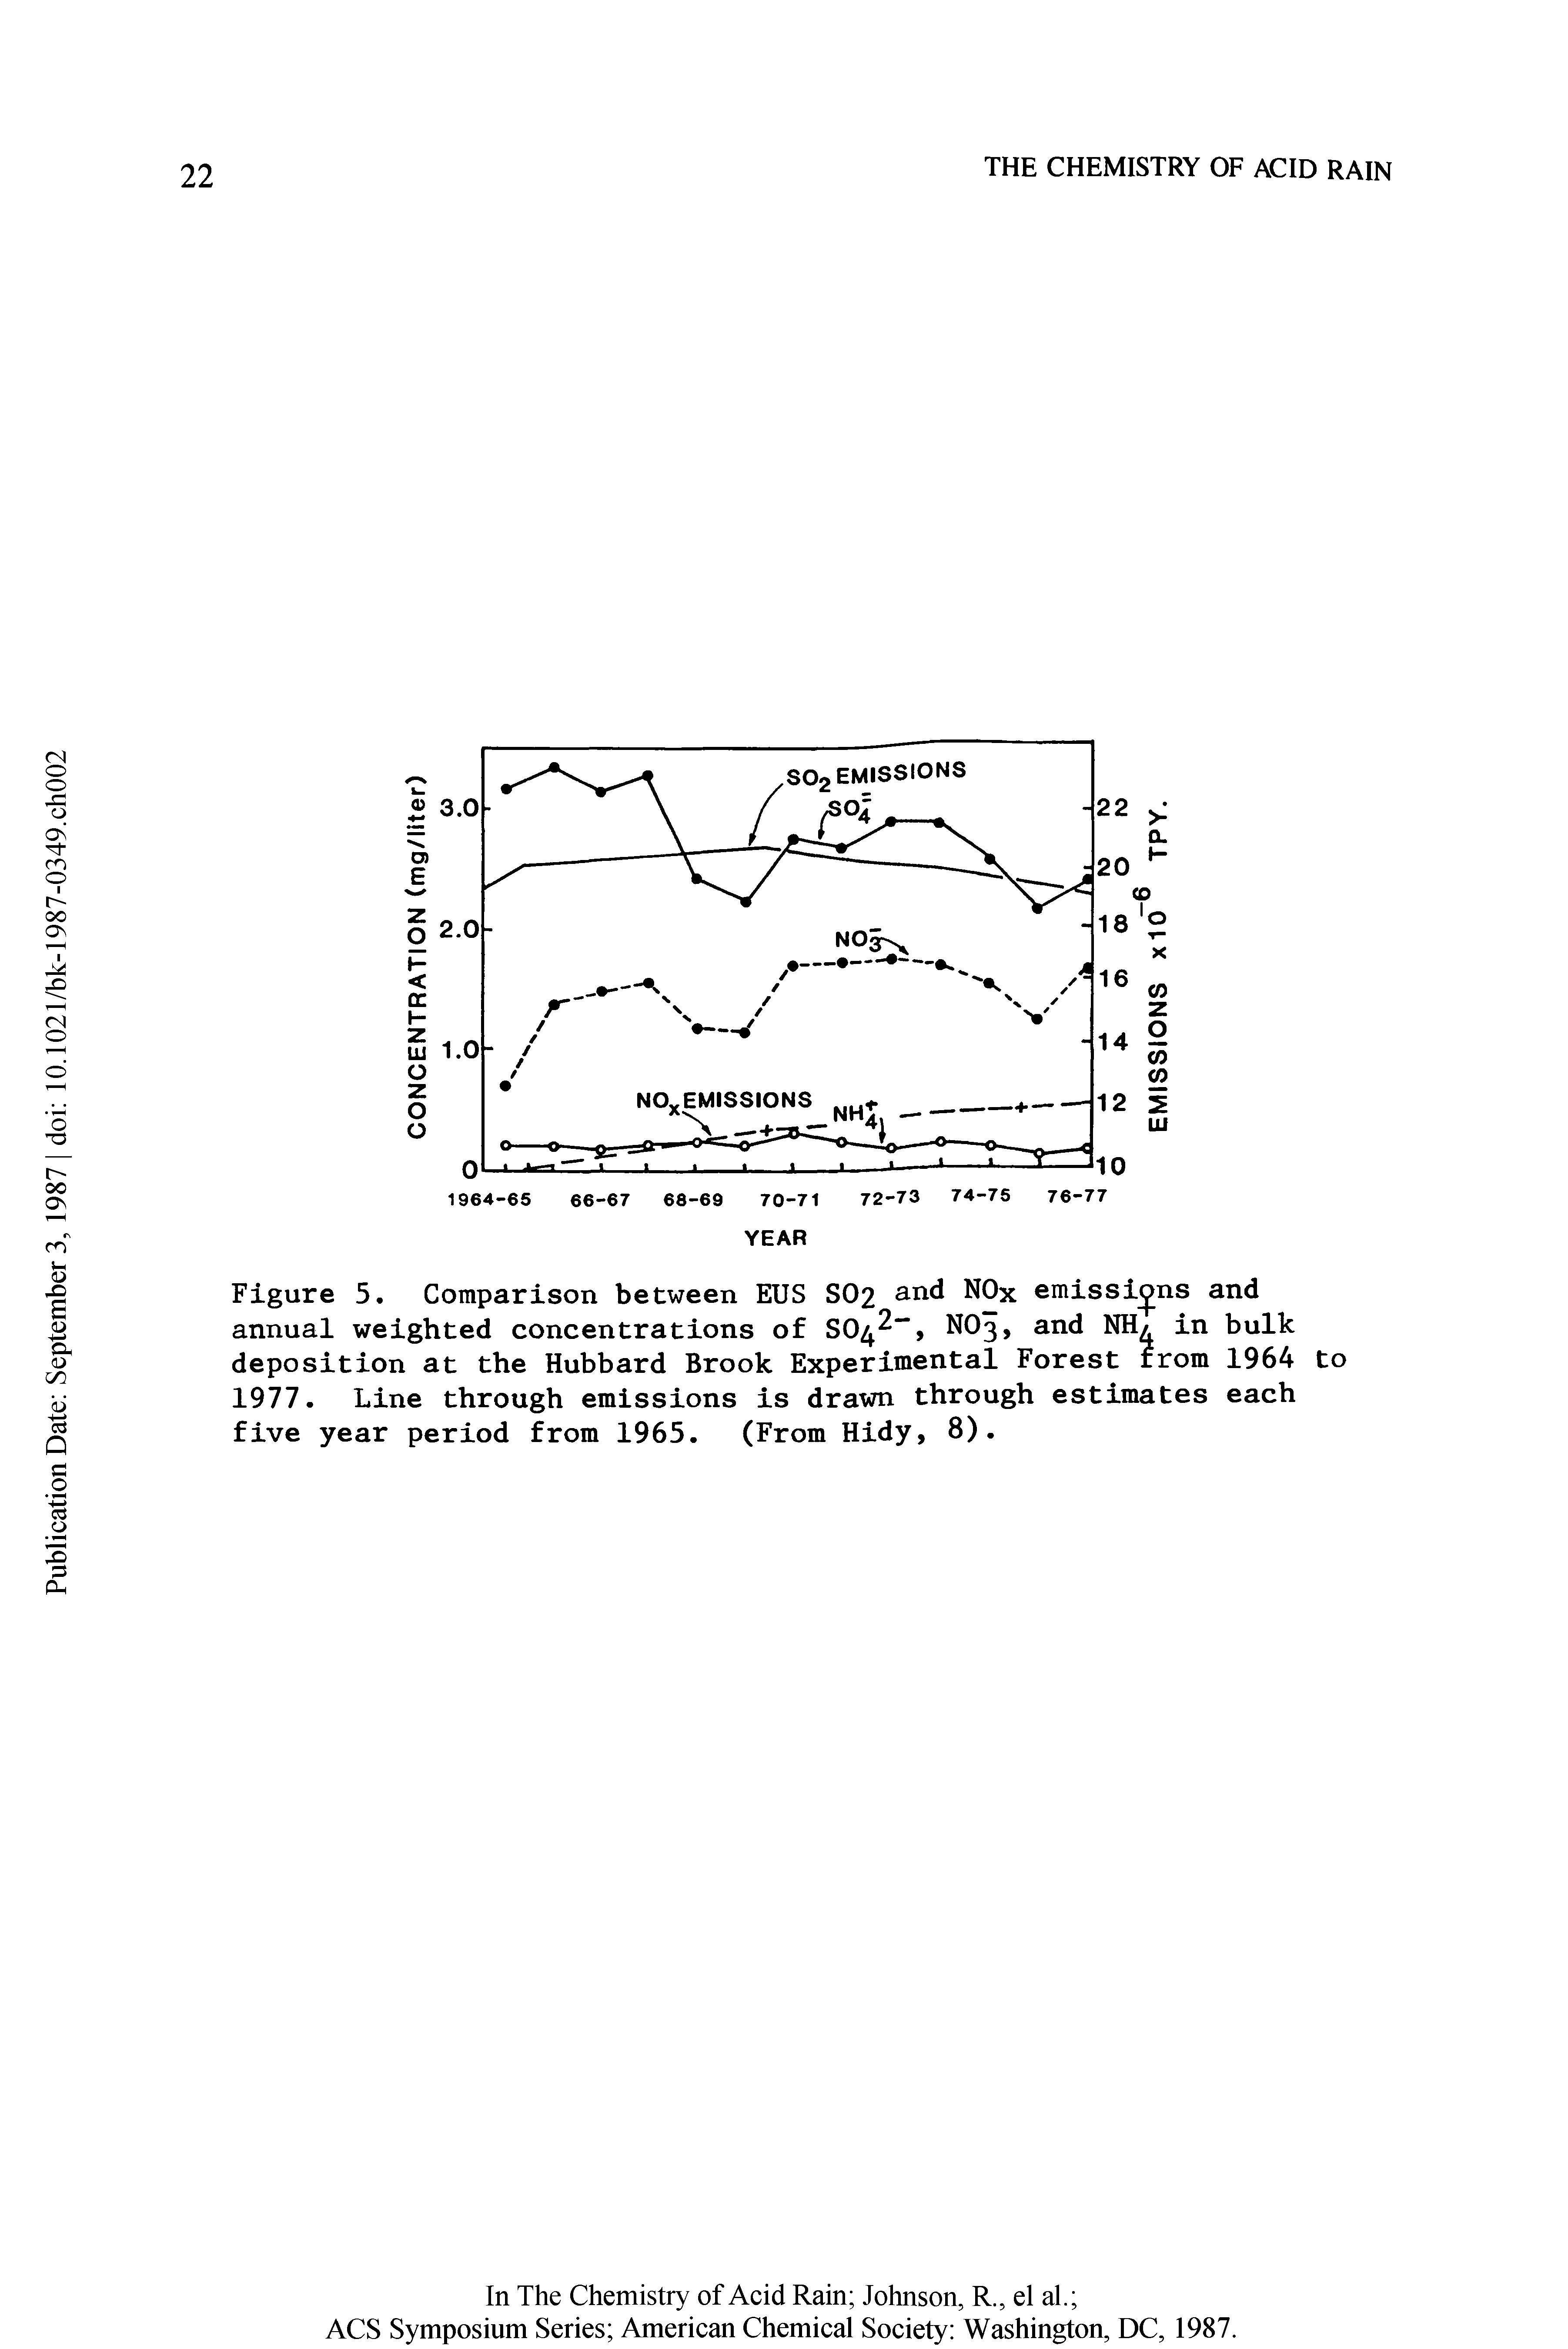 Figure 5. Comparison between EUS S02 anc NOx emissions and annual weighted concentrations of SO -, NO3, and NH in bulk deposition at the Hubbard Brook Experimental Forest from 1964 to 1977. Line through emissions is drawn through estimates each five year period from 1965. (From Hidy, 8).